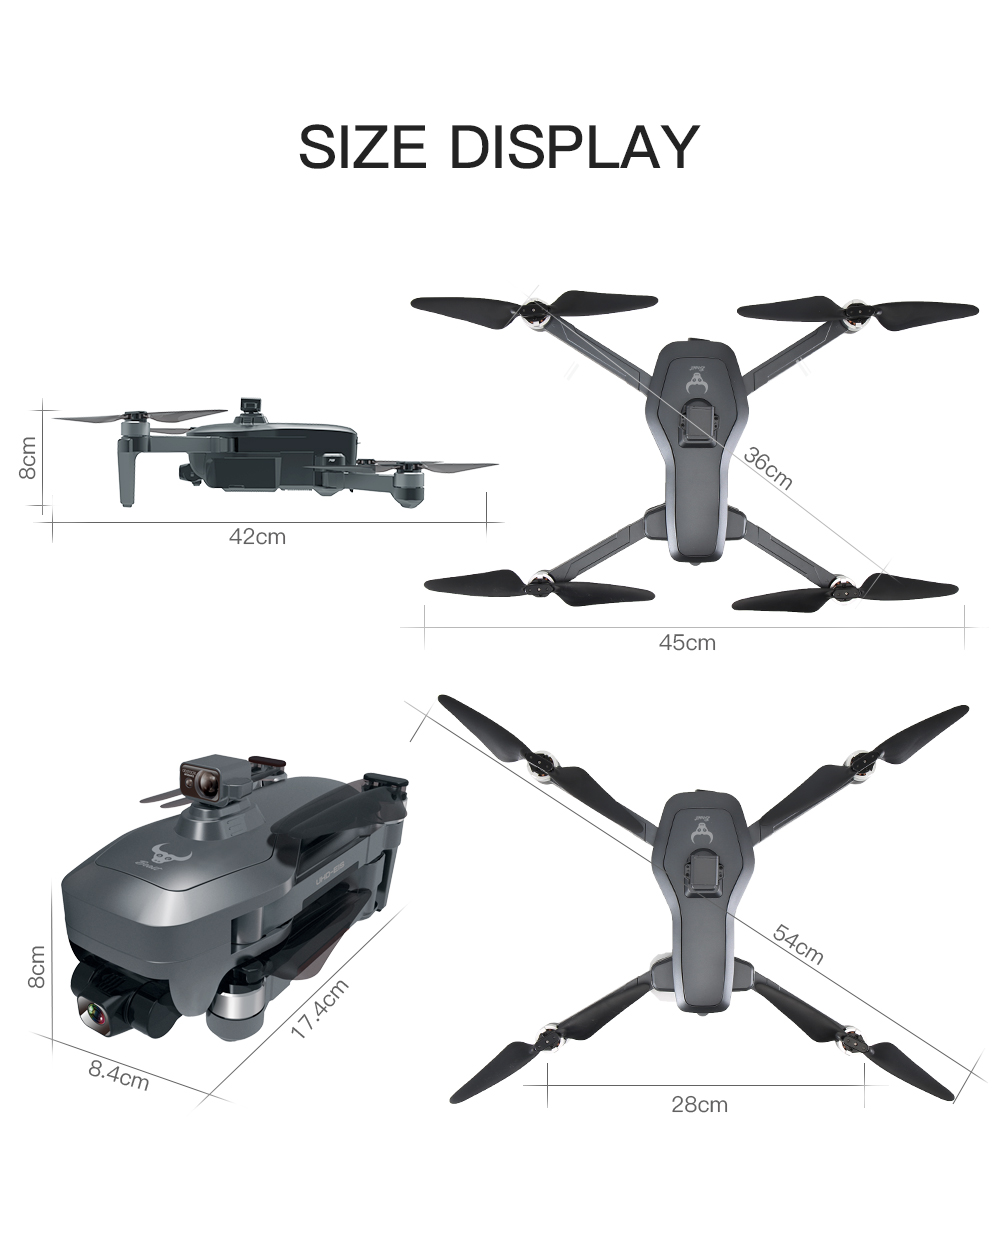 ZLL SG906 MAX GPS 5G WIFI FPV With 4K HD Camera 3-Axis EIS Anti-shake Gimbal Obstacle Avoidance Brushless Foldable RC Drone Quadcopter RTF 26